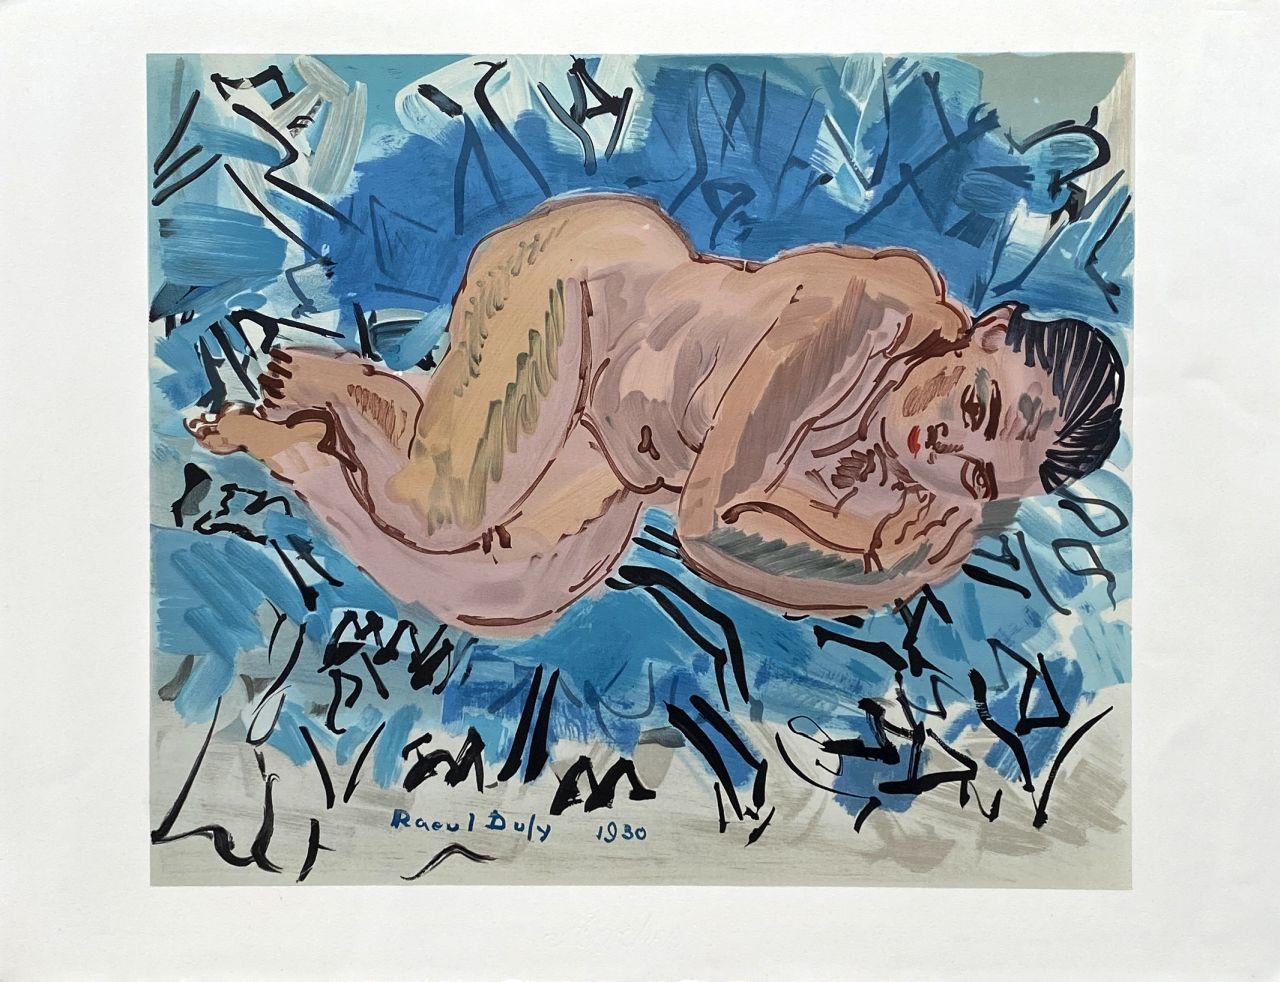 Raoul Dufy Figurative Print - The Bather - Lithograph Signed in the Plate (Mourlot)